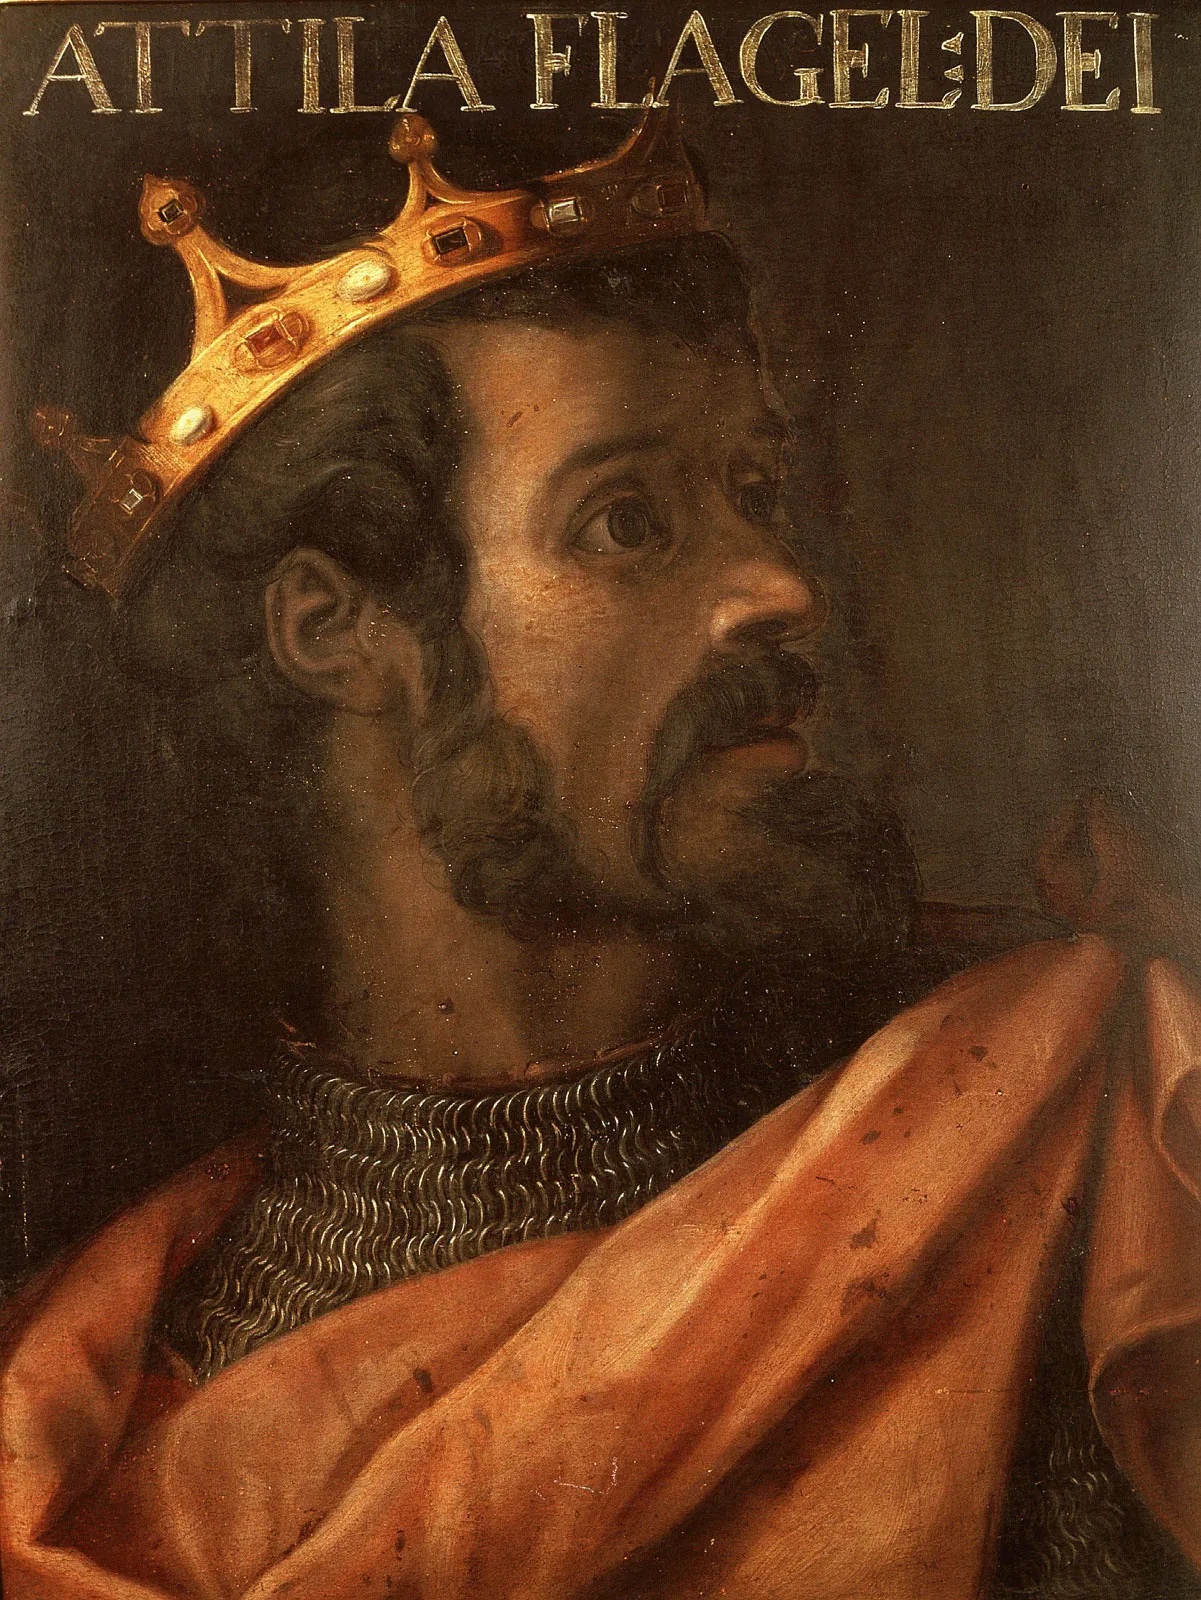 A painting of a crowned Attila in a red robe and the name “ATTILA FLAGELDEI” in gold letters.